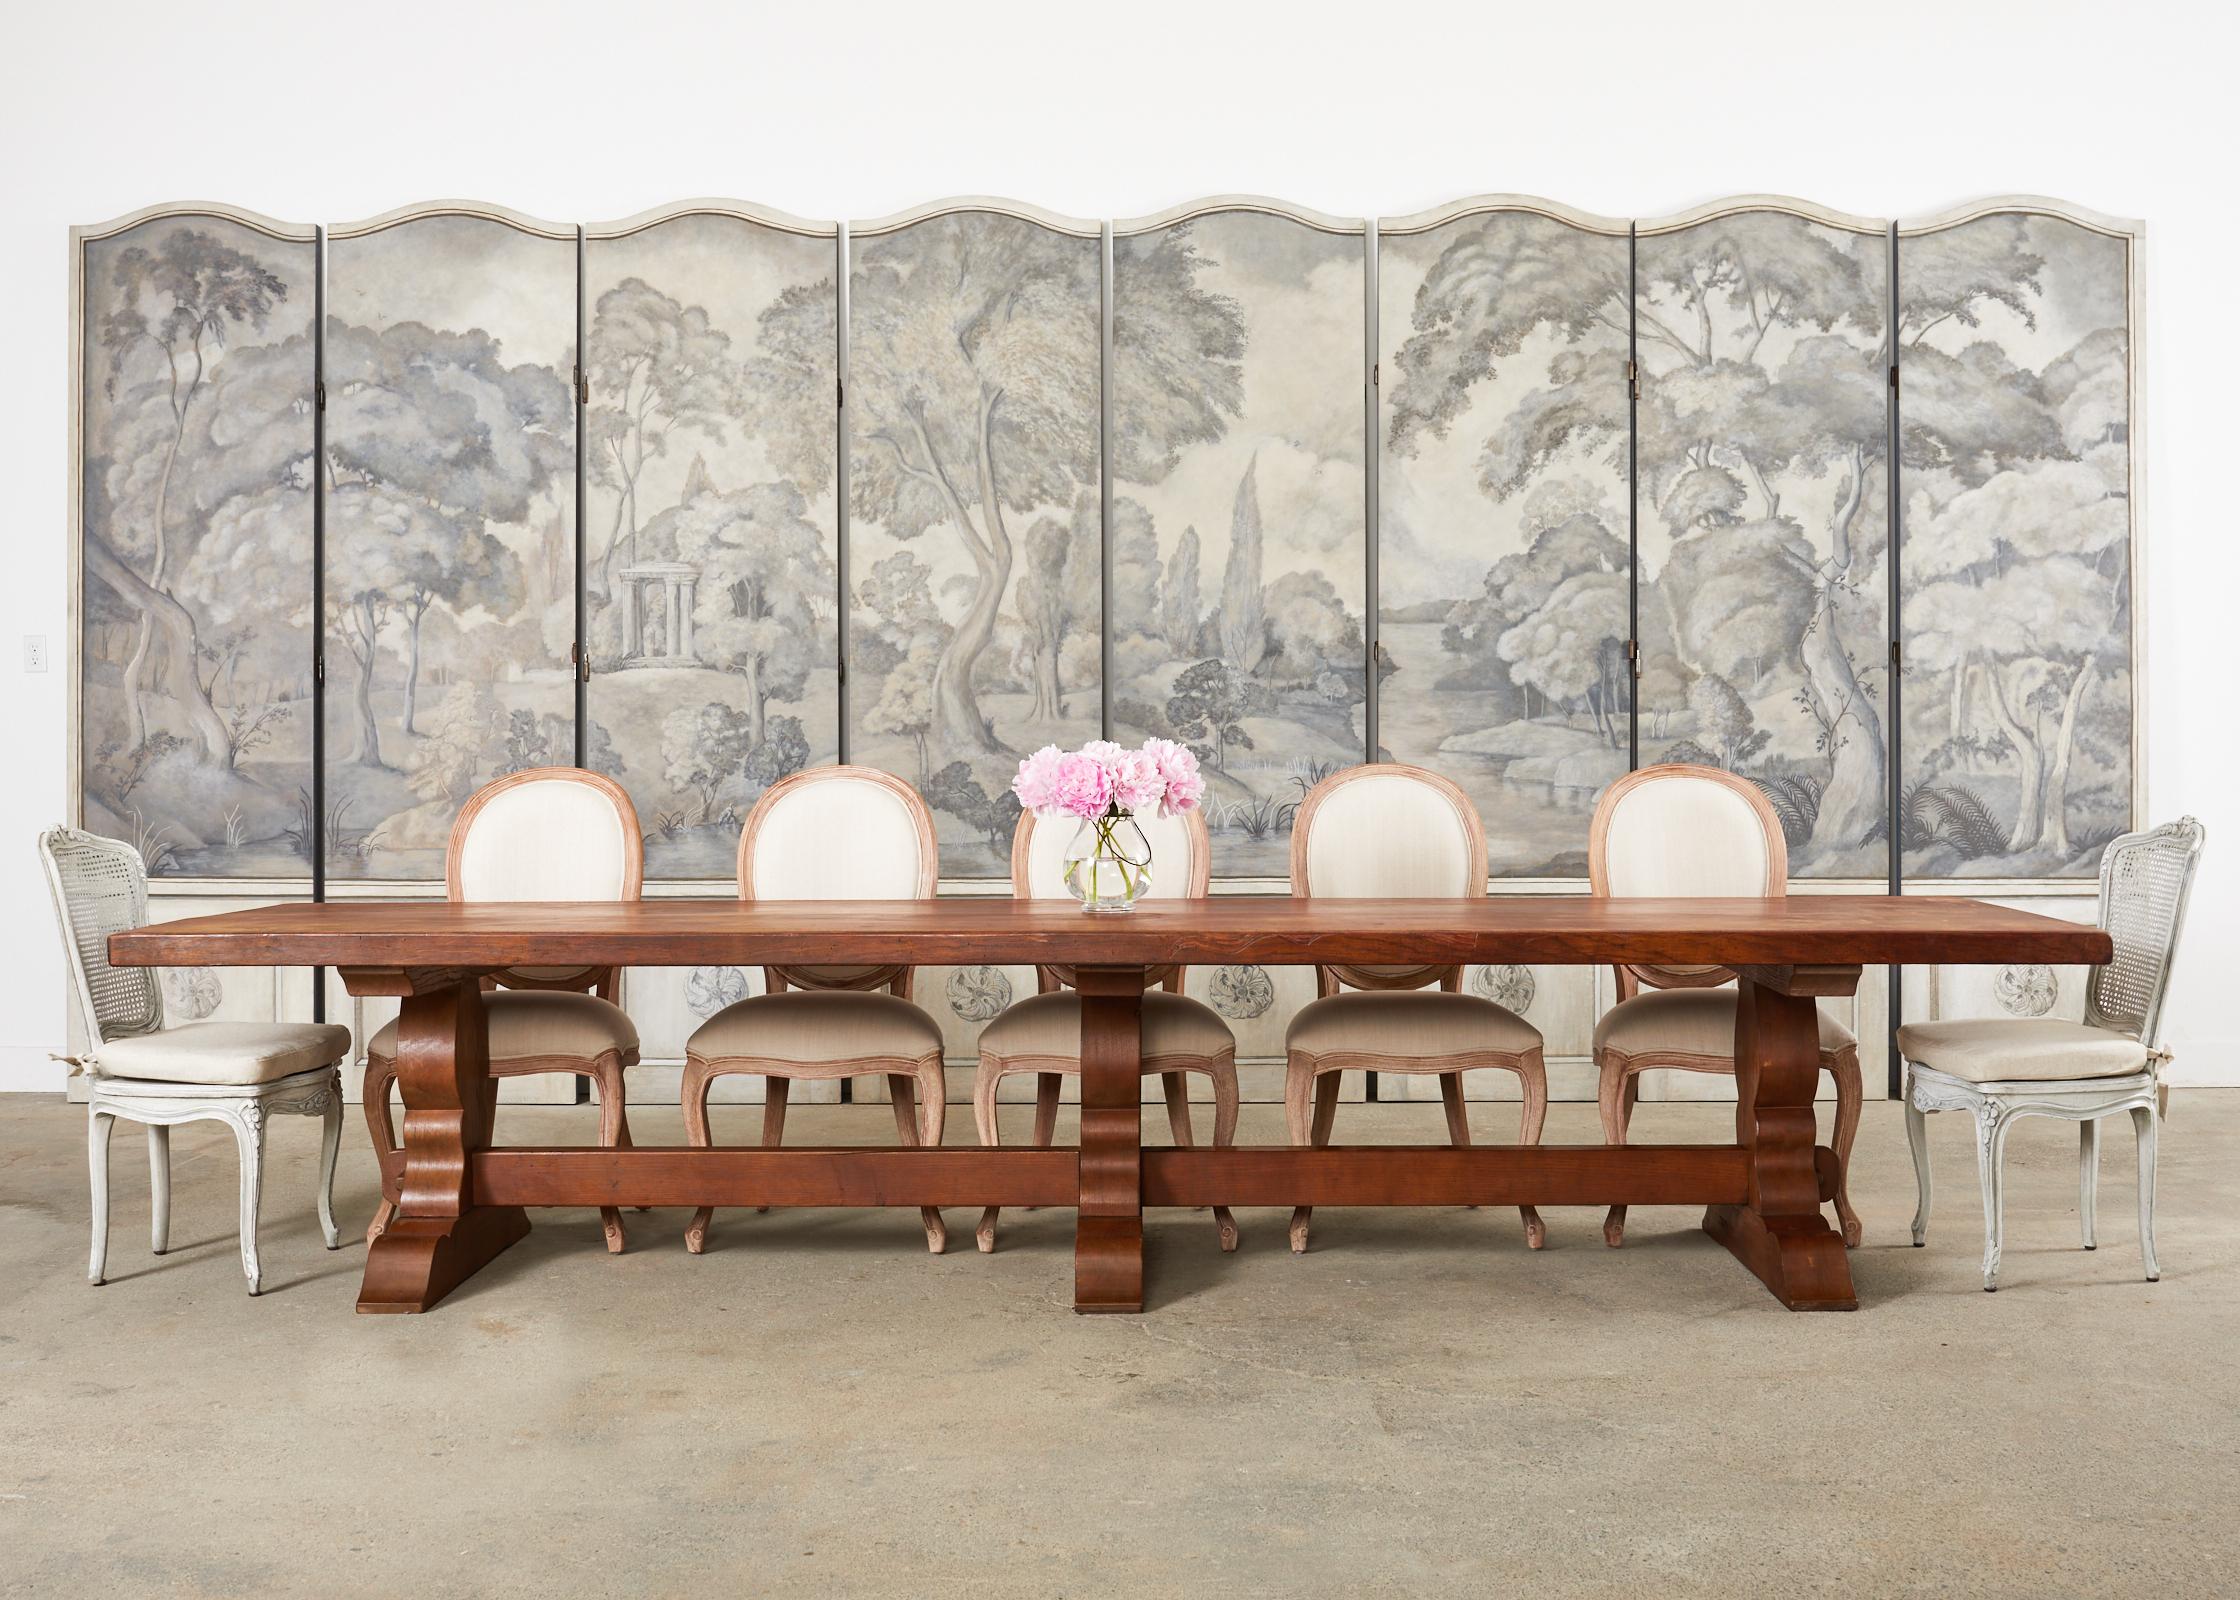 Monumental eight panel floor screen featuring a serene European landscape in Grisaille. Bespoke screen from Dennis & Leen in Los Angeles, CA measuring over 20 feet wide and nine feet high. Each panel has a serpentine shaped top and heavy metal